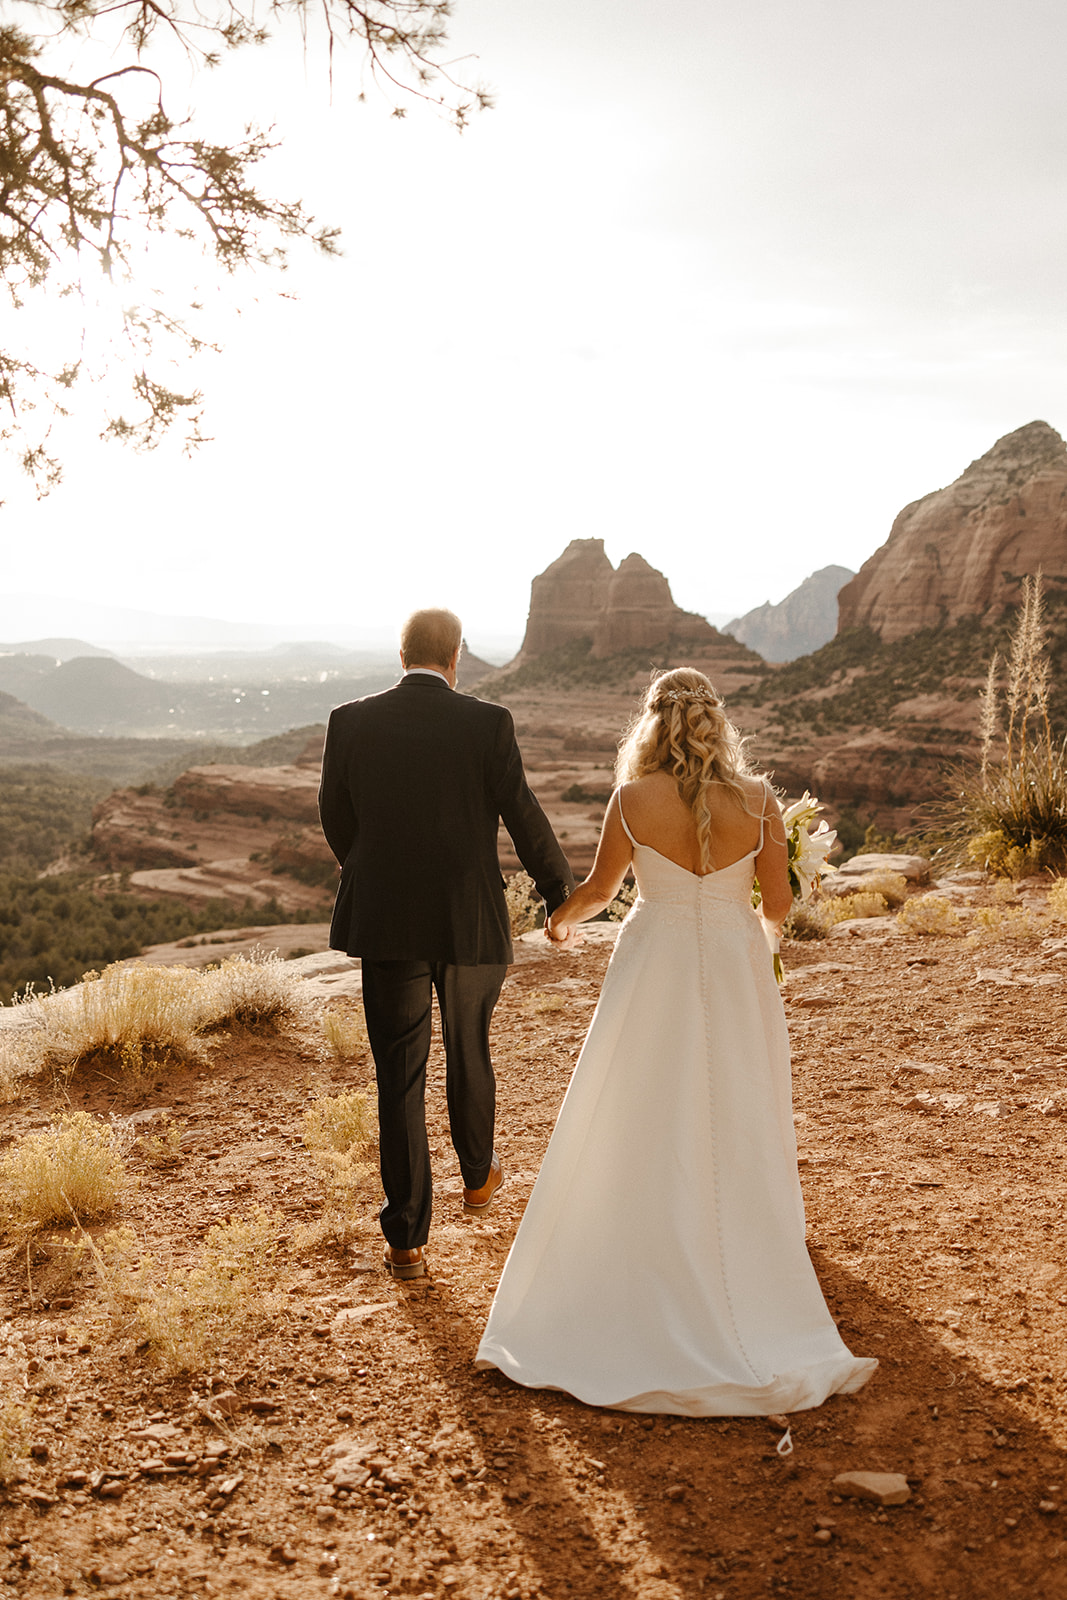 stunning bride and groom pose together in one of the best desert locations to elope in Arizona!